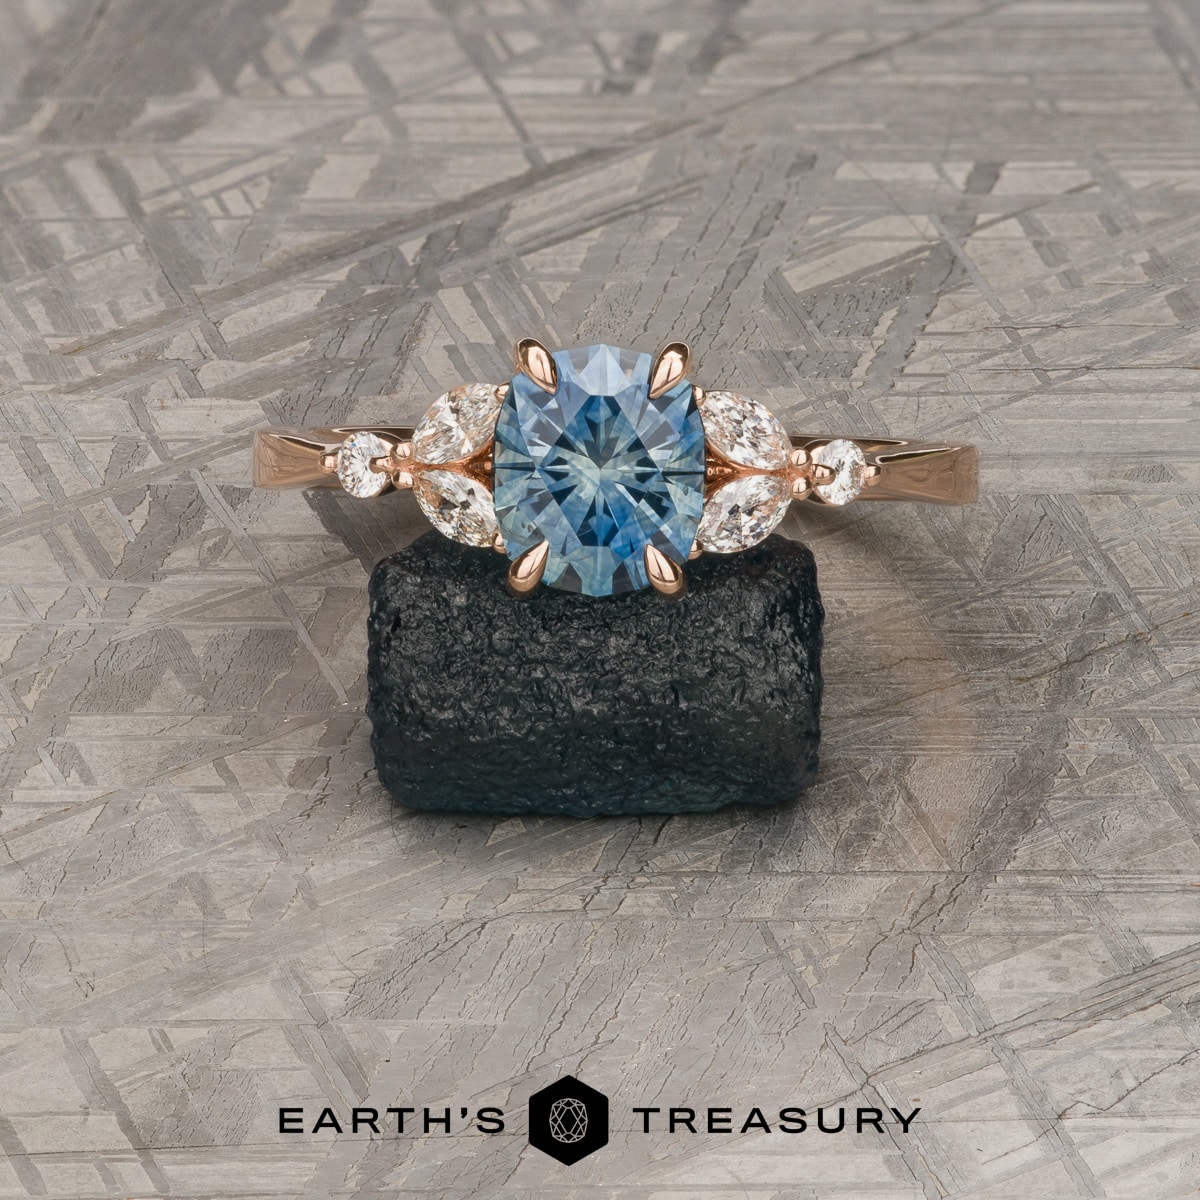 The "Cattleya" ring in 14k rose gold with 1.89-carat Montana sapphire